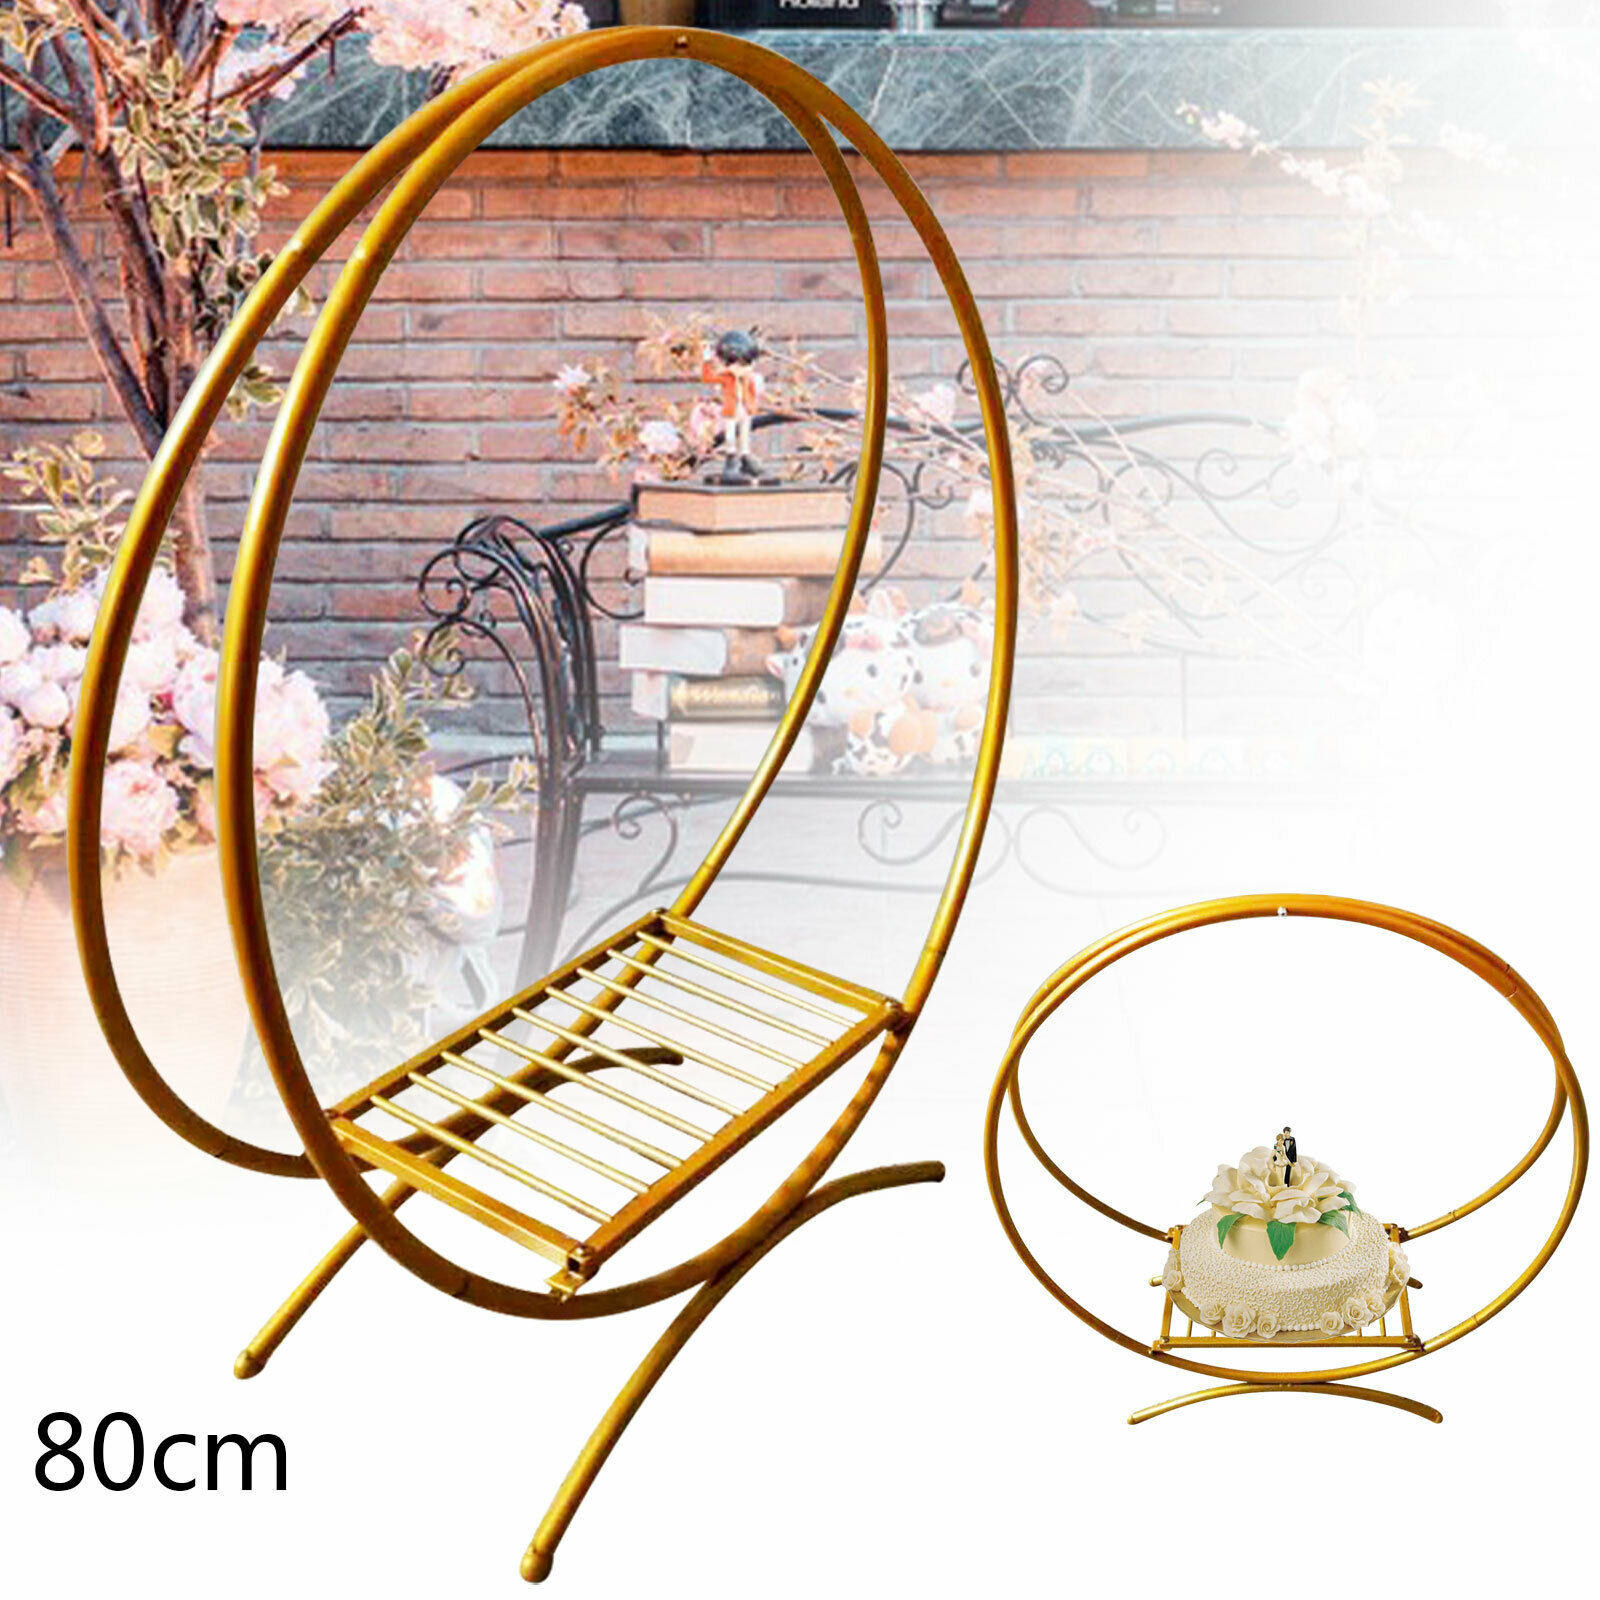 80cm Flower Stand Wedding Cake Stand Plate Double Hooped Floral Golden Arch Rack